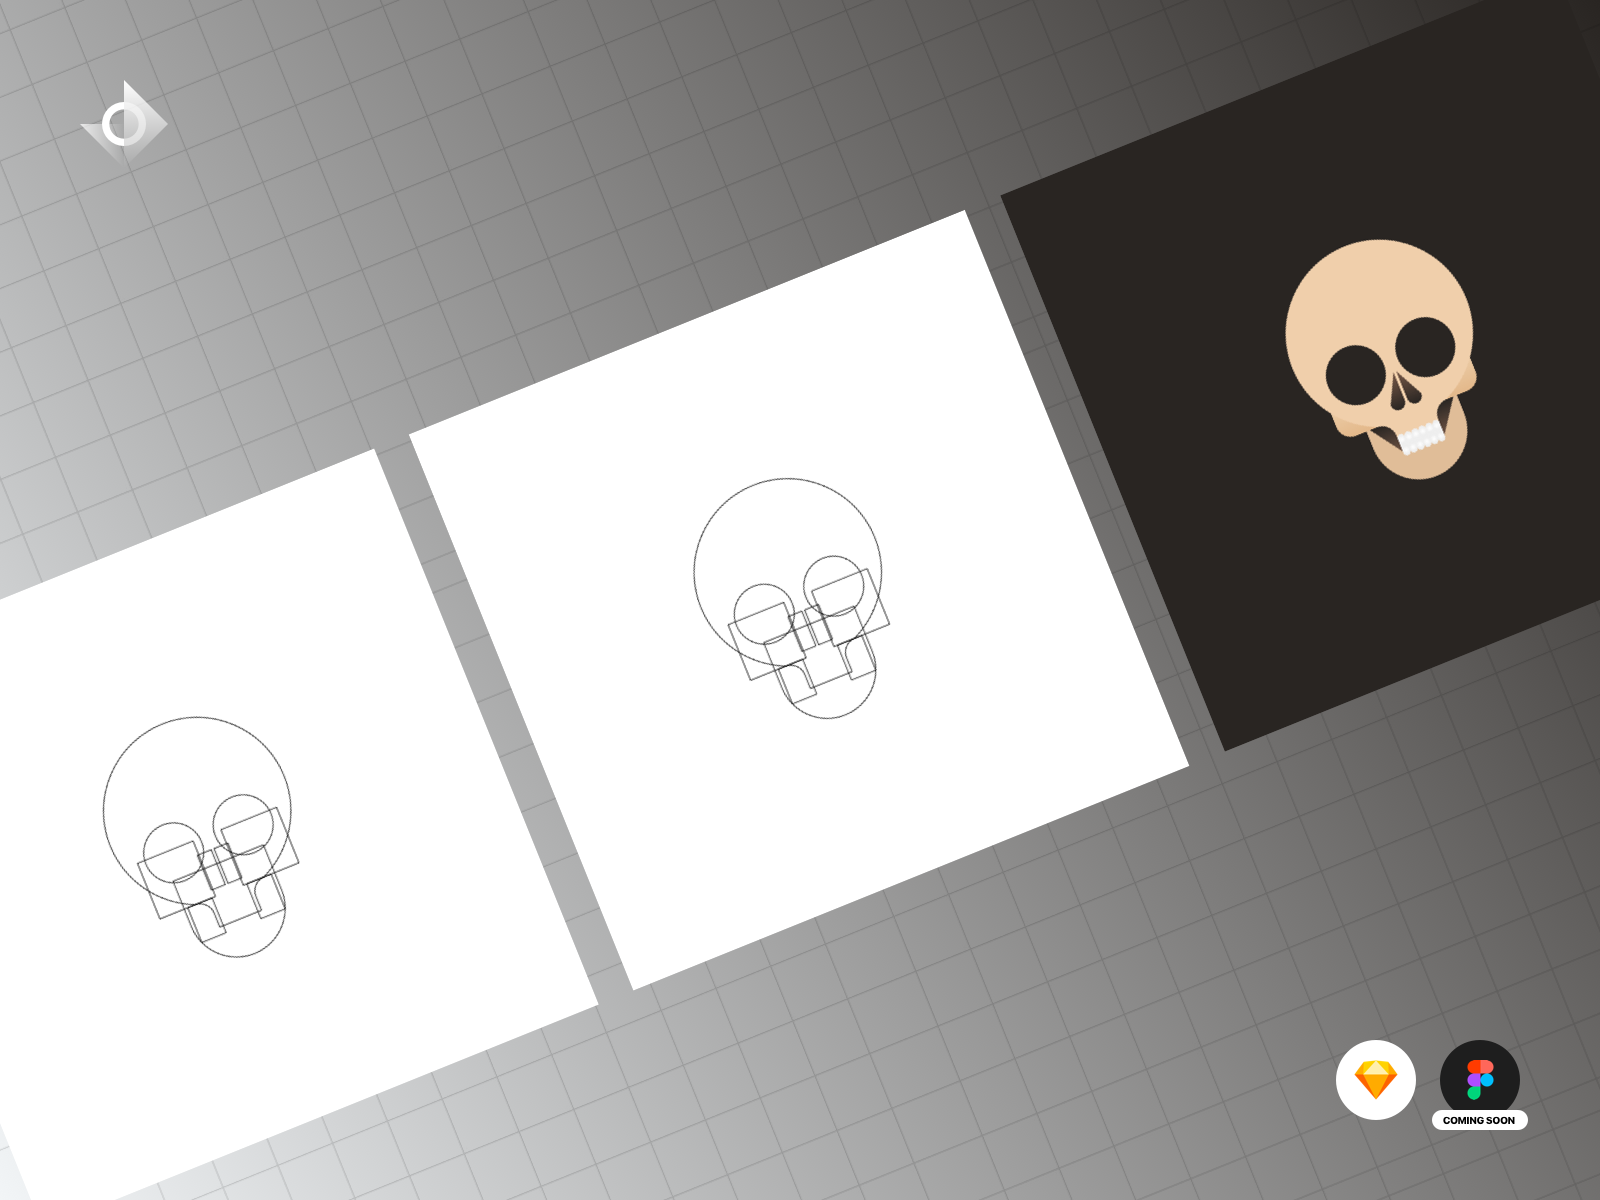 A geometric skull illustration tutorial showing a series of steps it took to achieve the final result.